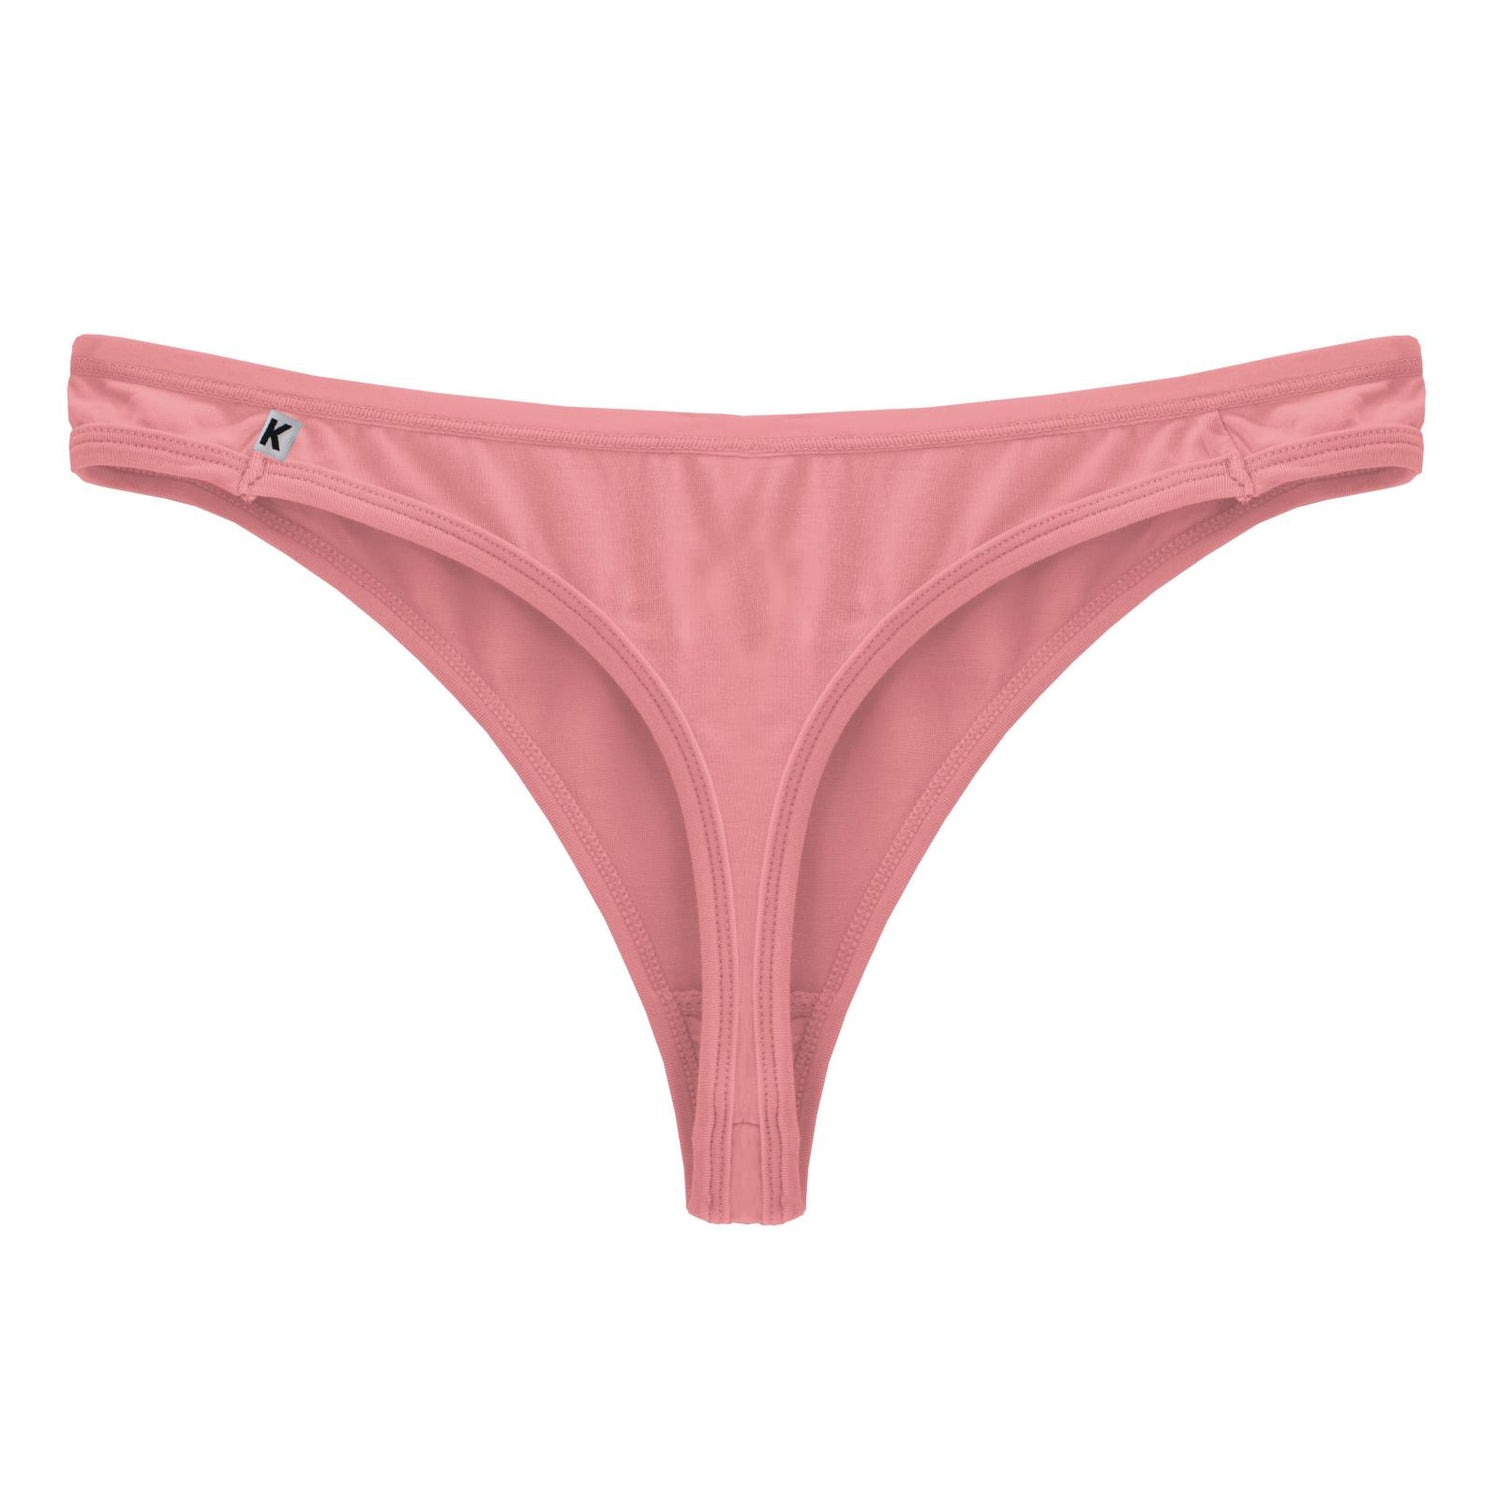 Women's Solid Classic Thong Underwear in Strawberry